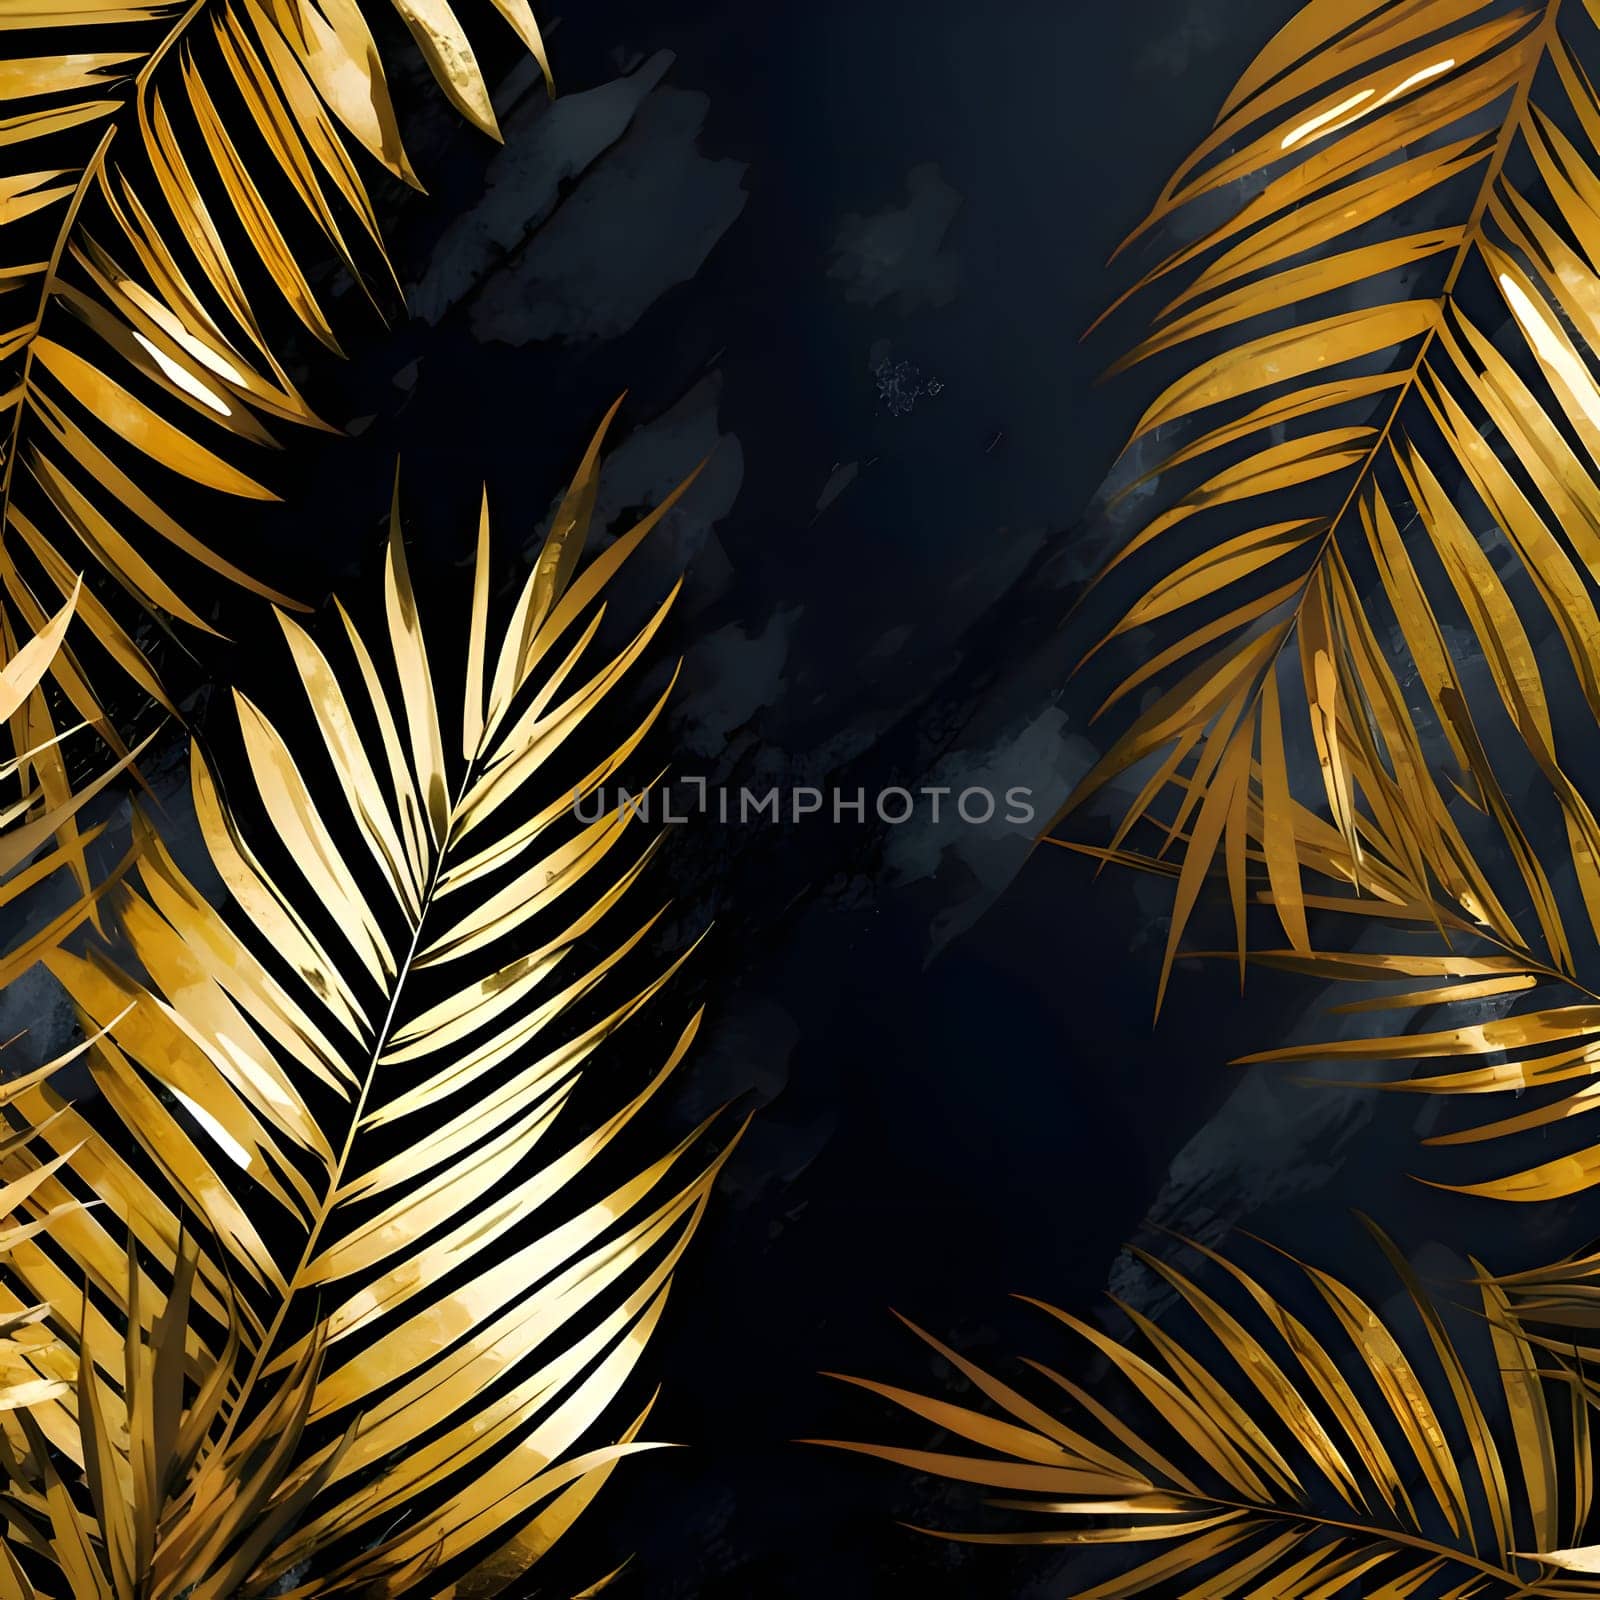 Patterns and banners backgrounds: Tropical gold palm leaves on black marble background. Vector illustration.